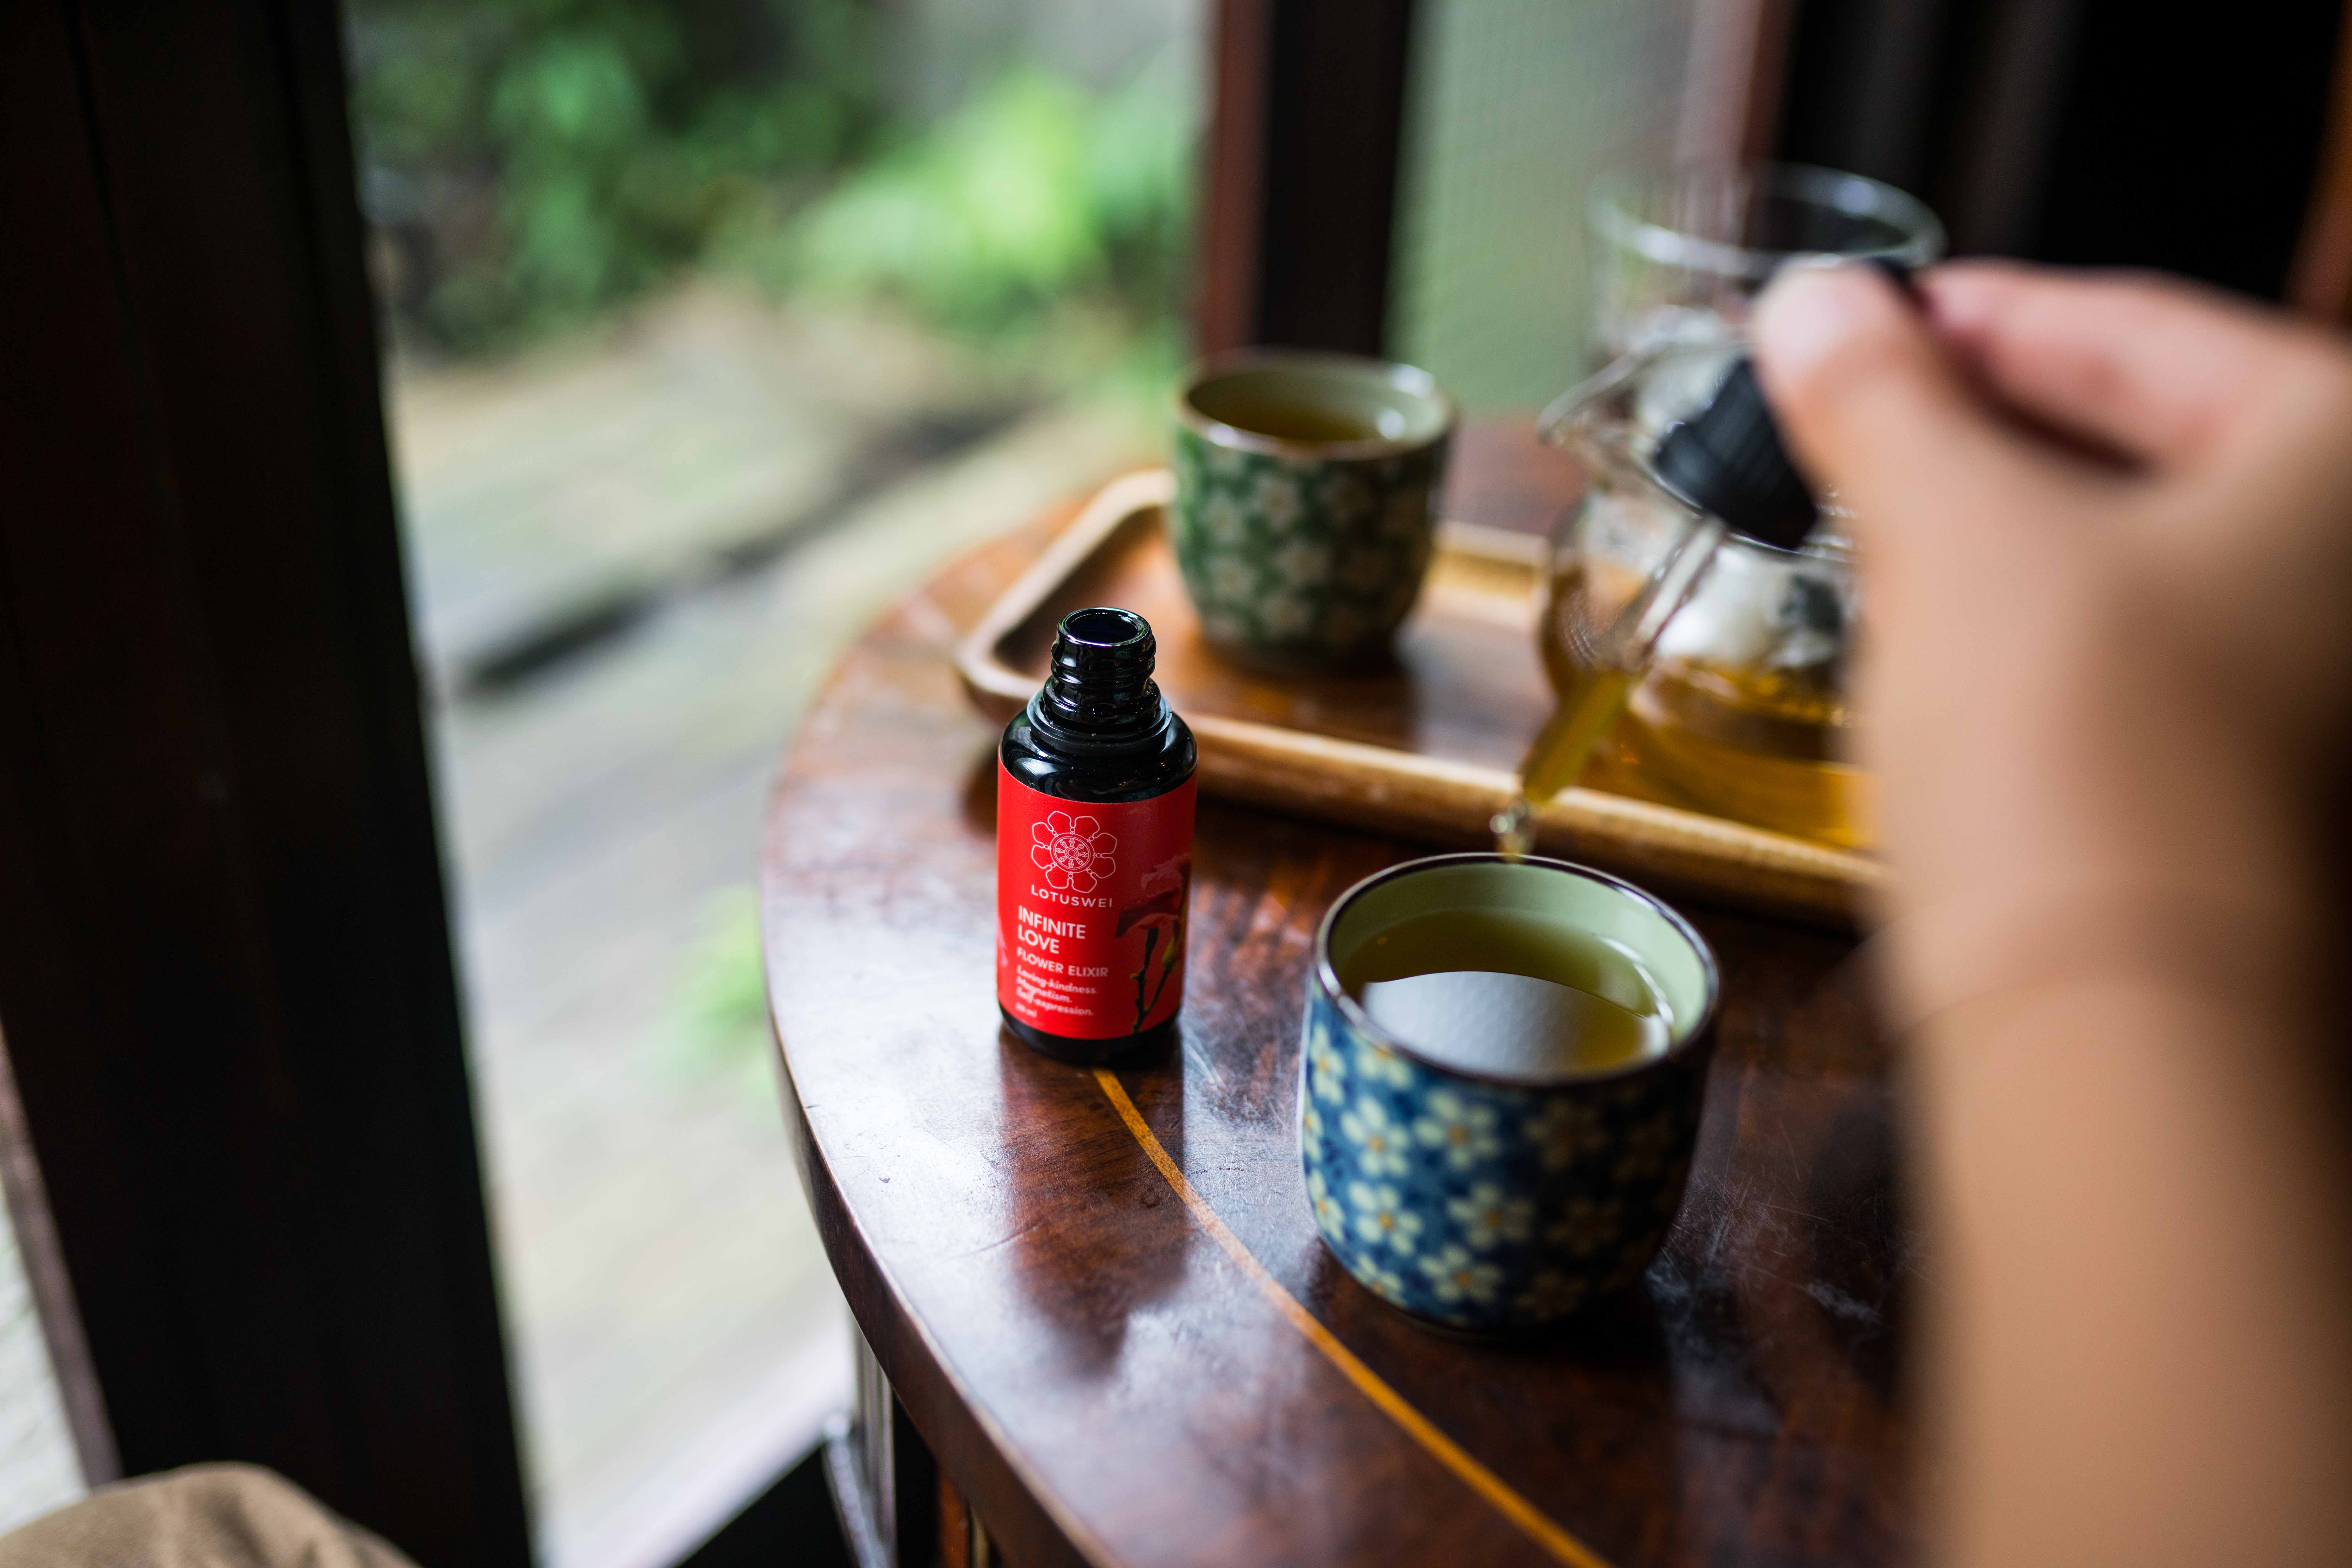 Woman adding LOTUSWEI drops to her tea sitting by scenic window view.